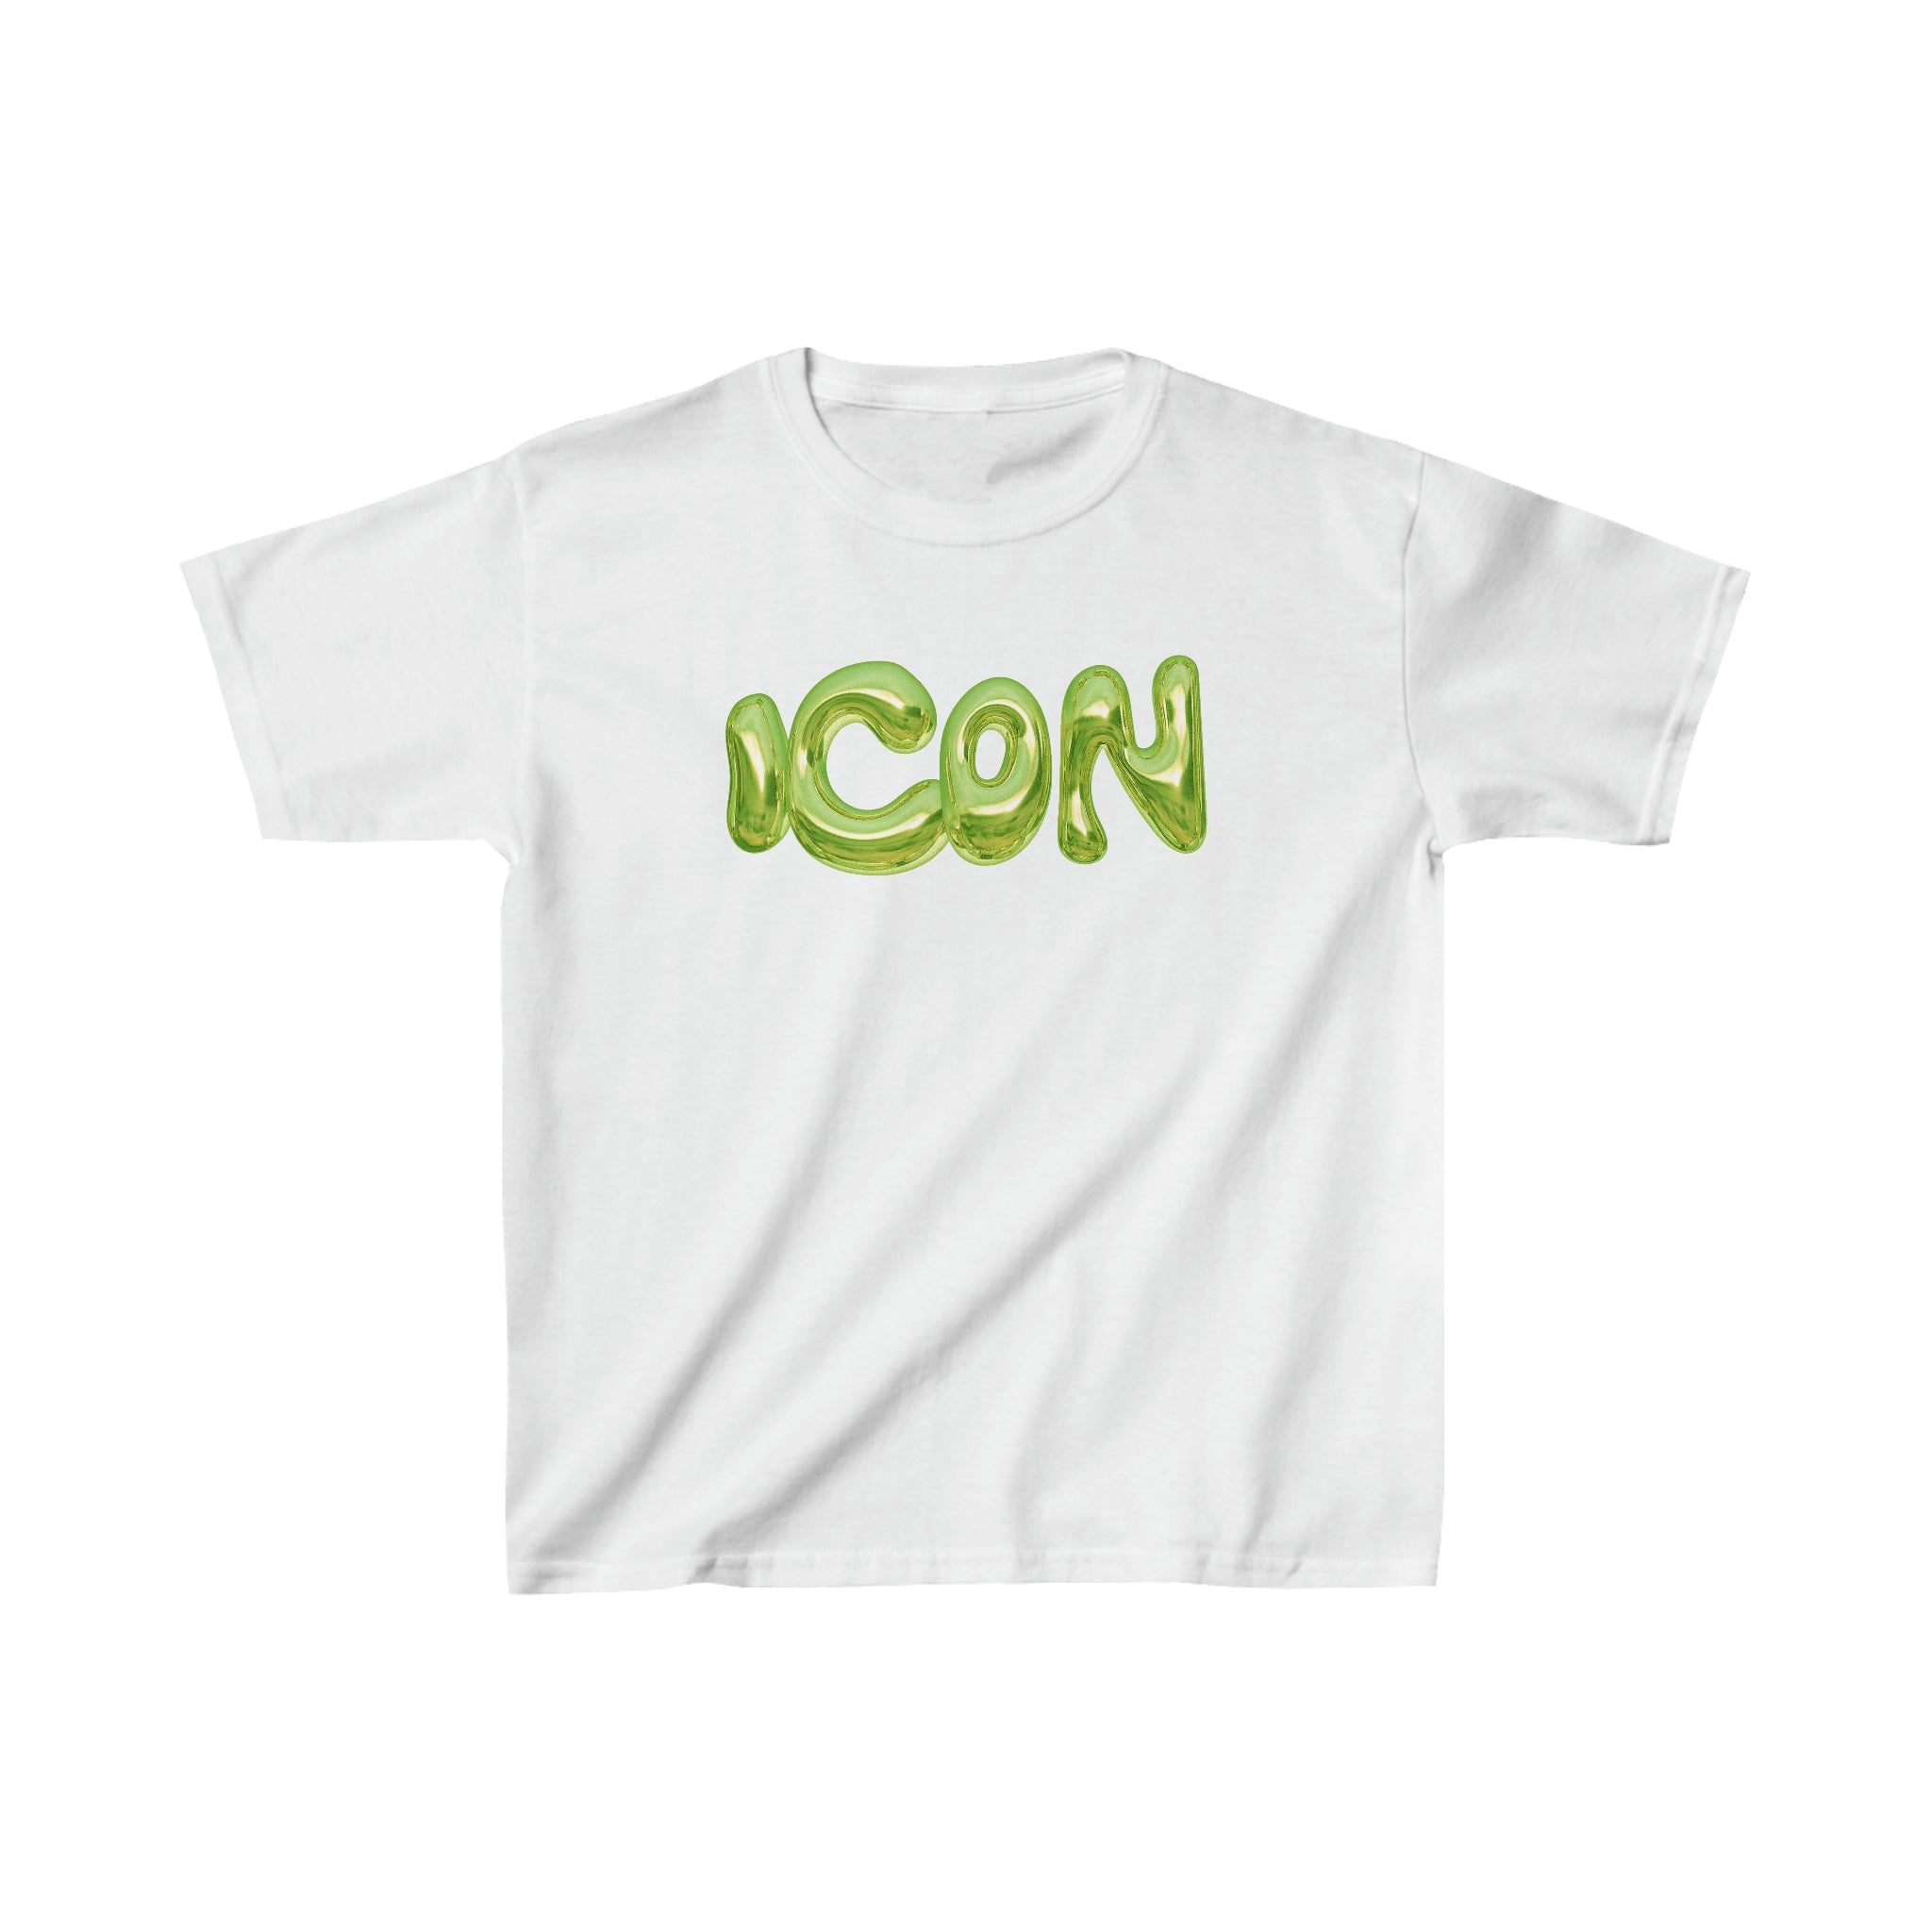 'ICON' baby tee - In Print We Trust